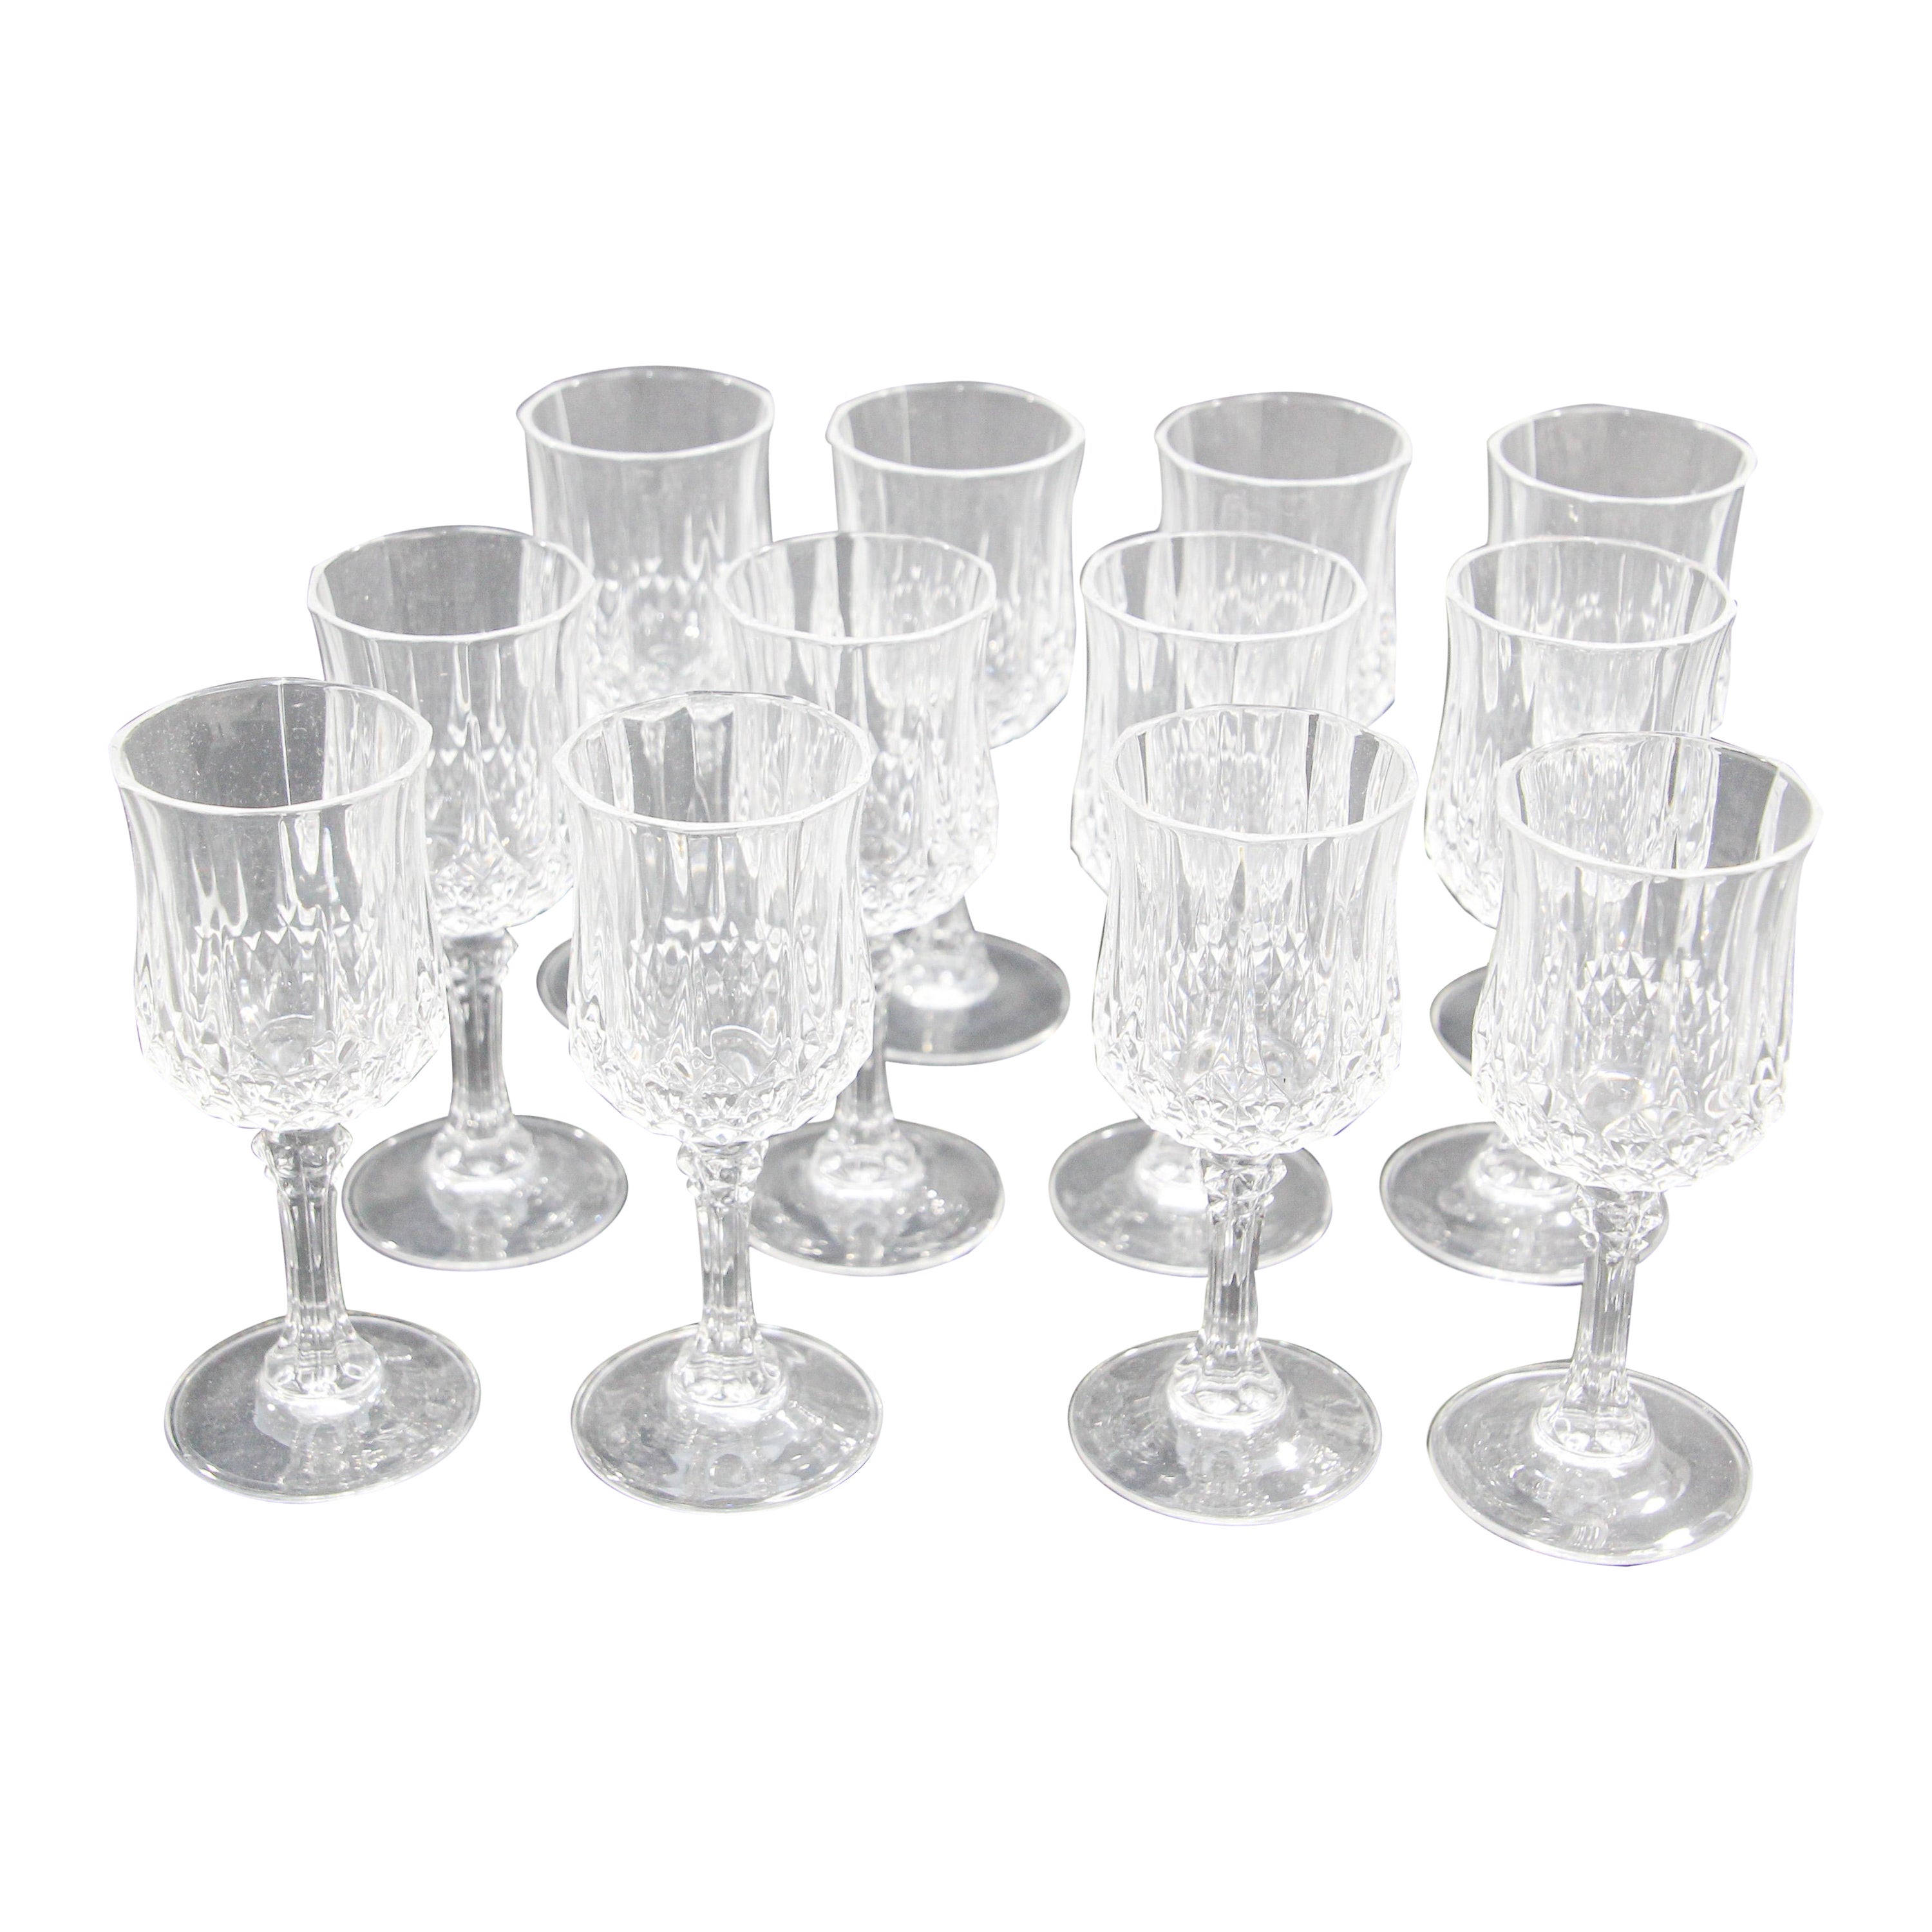 Crystal D' Arques Longchamp Footed Drinking Glasses, set of 12